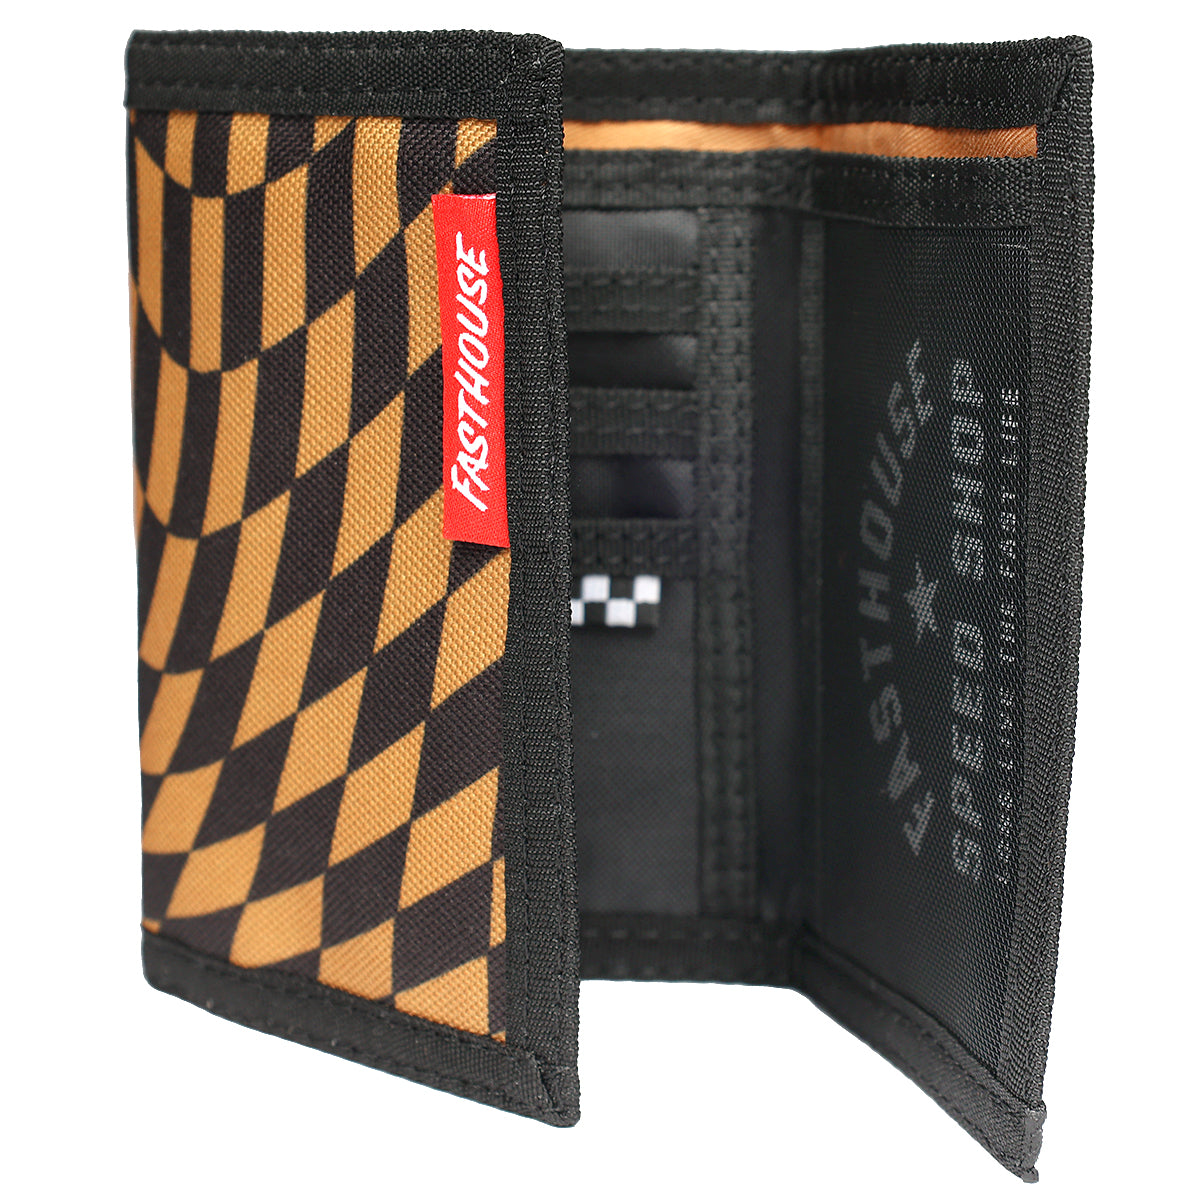 Distortion Trifold Wallet